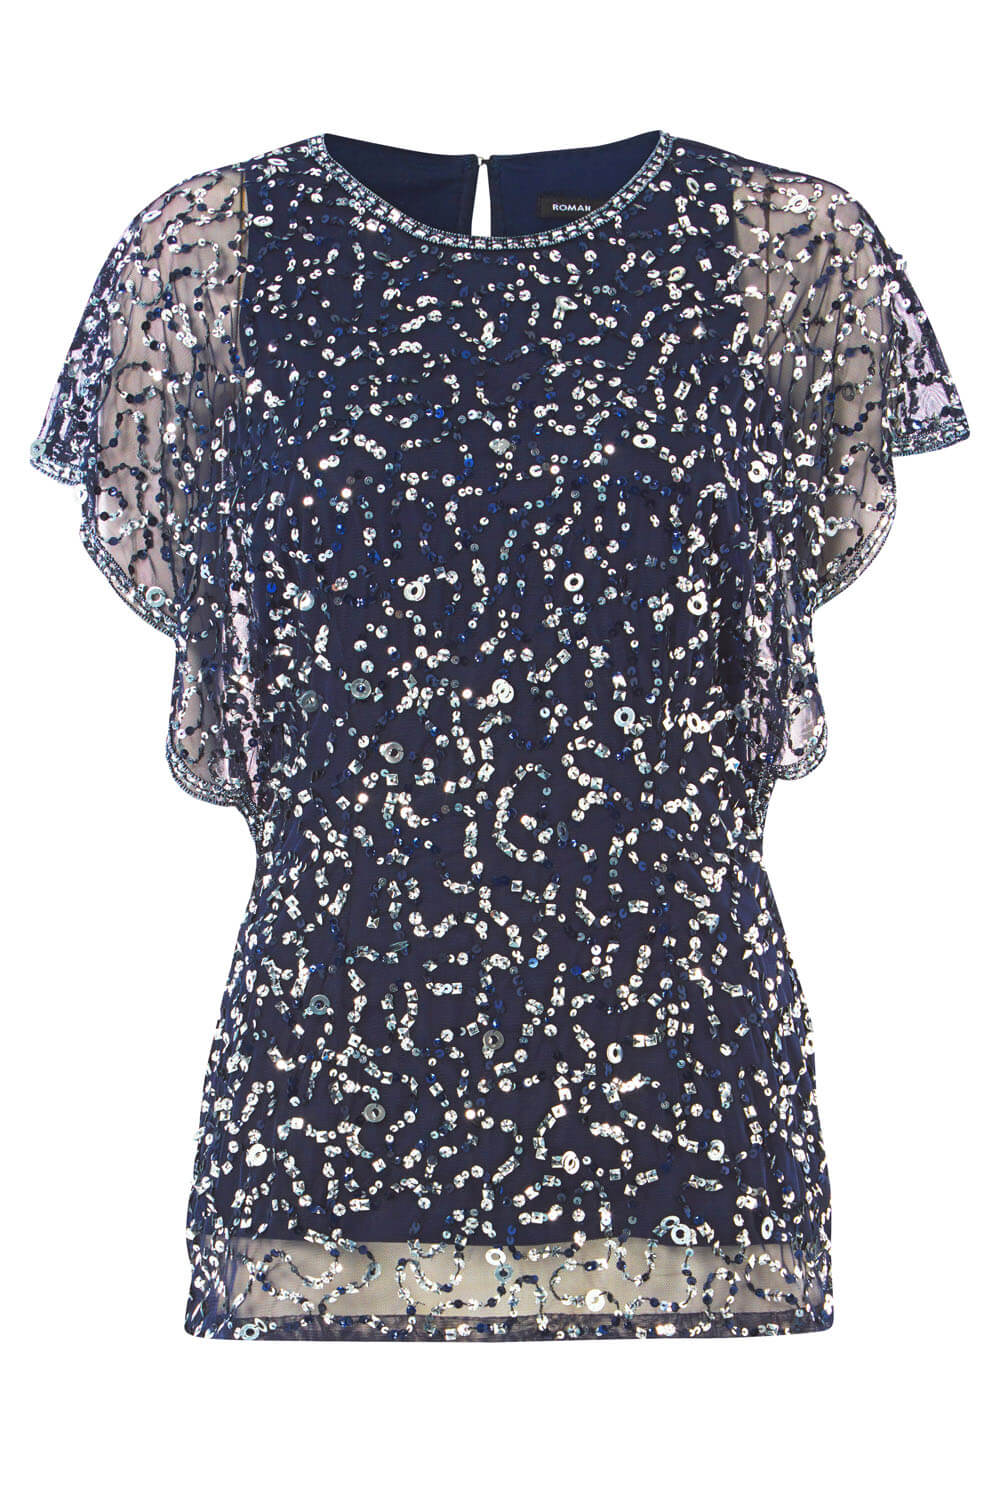 Midnight Blue Sequin Embellished Angel Sleeve Top, Image 5 of 5